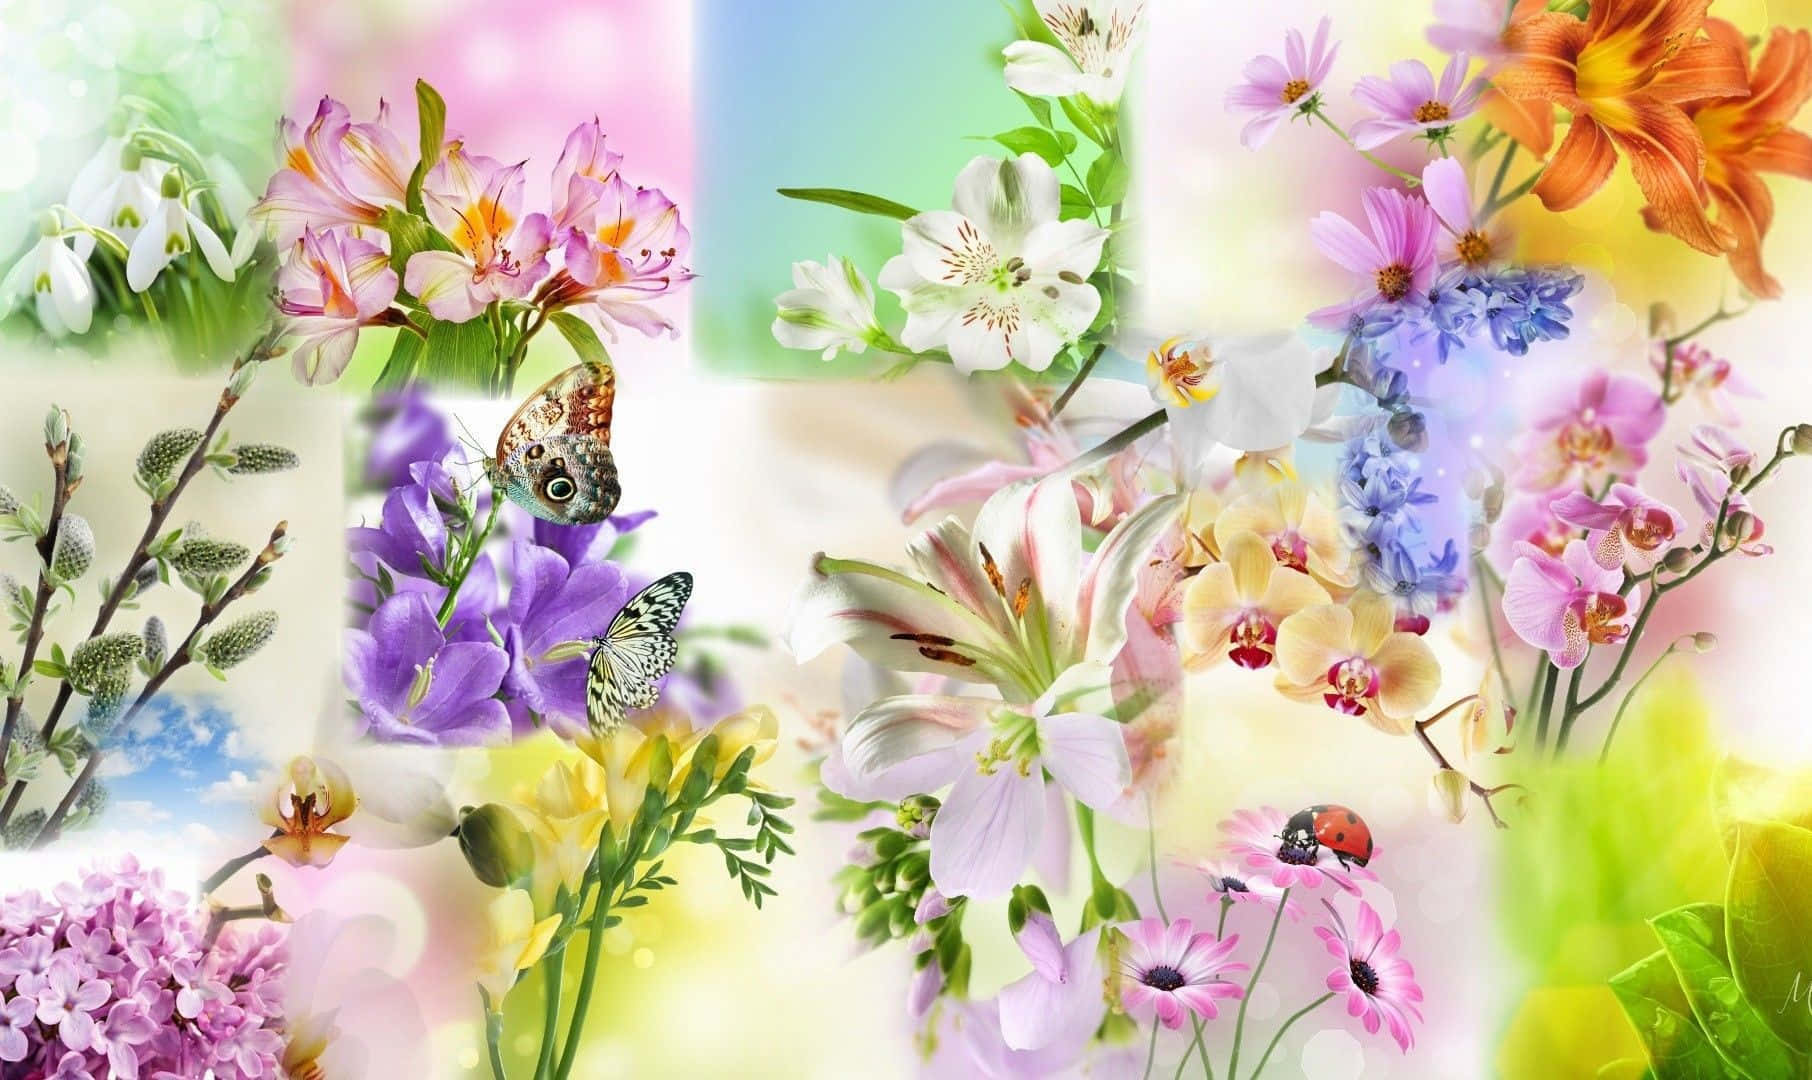 A Collage Of Flowers And Butterflies Wallpaper